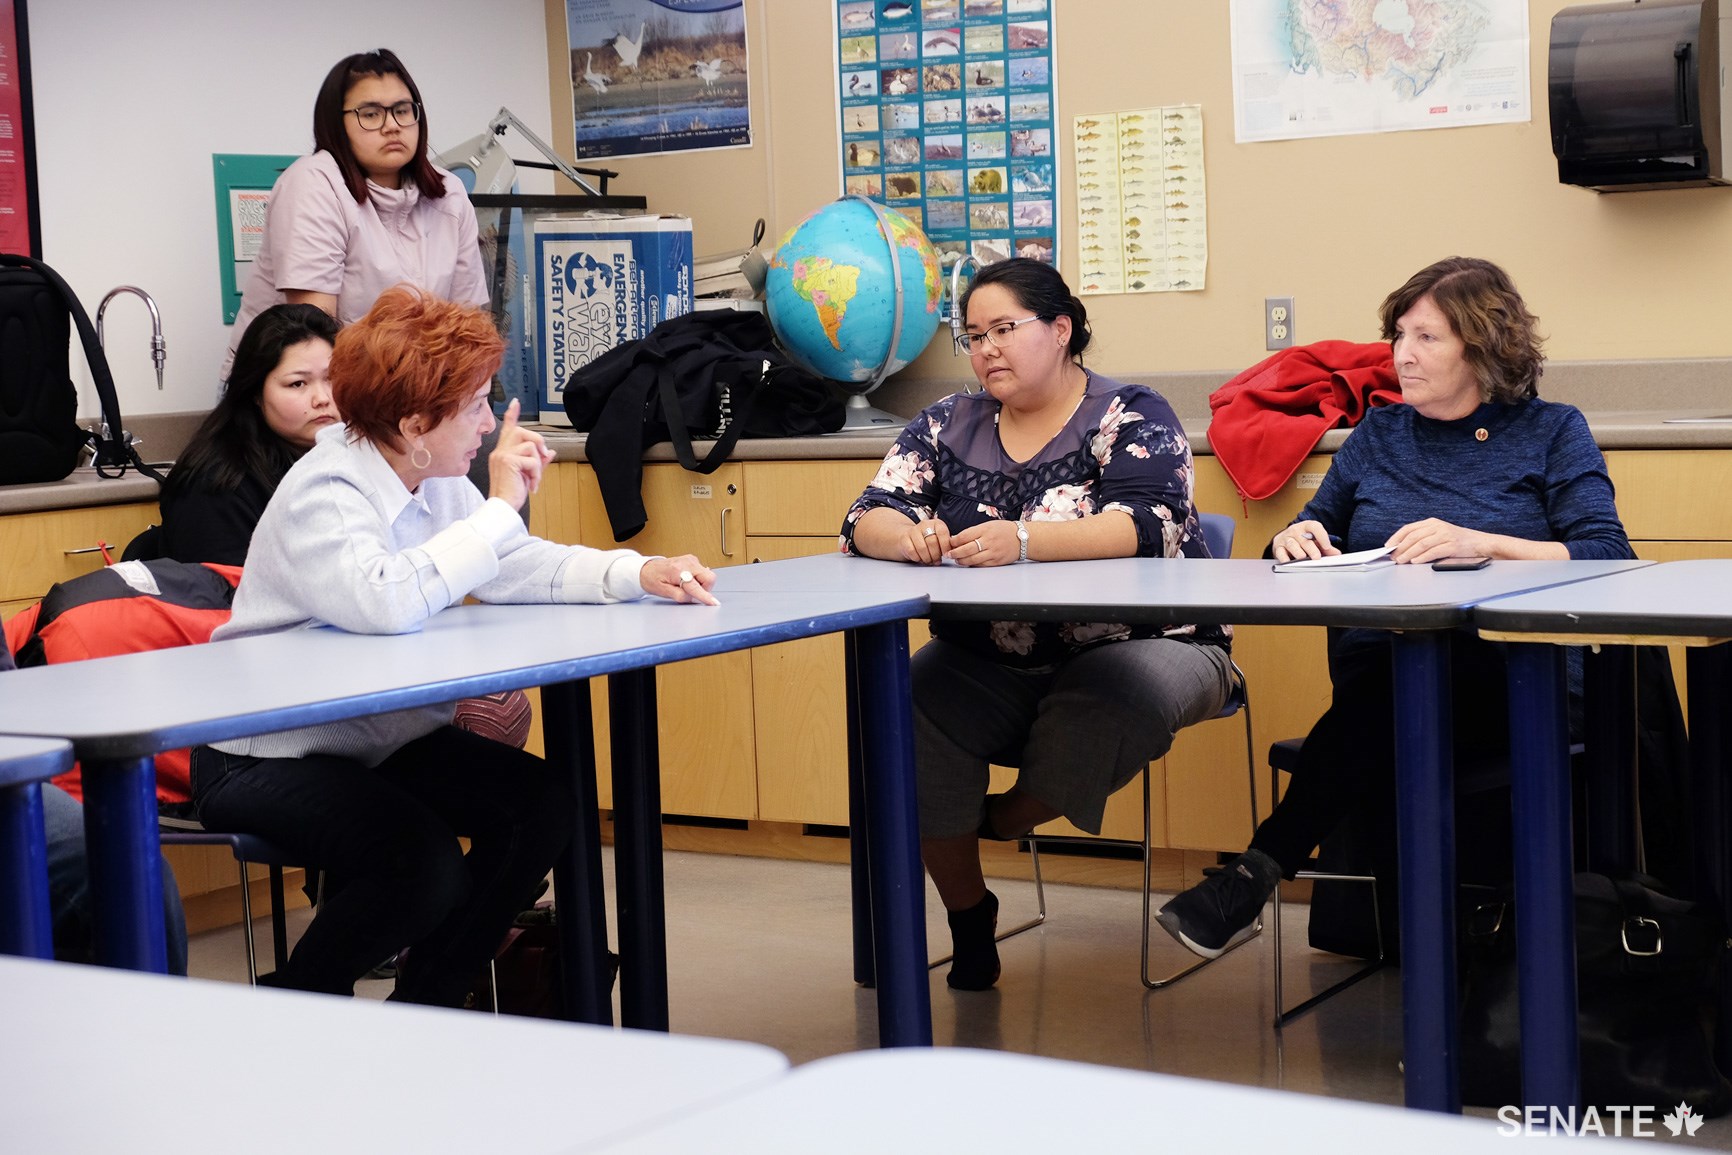 Senators Nicole Eaton and Mary Coyle speak with youth about their educational goals and needs at Aurora College in Inuvik, N.W.T.